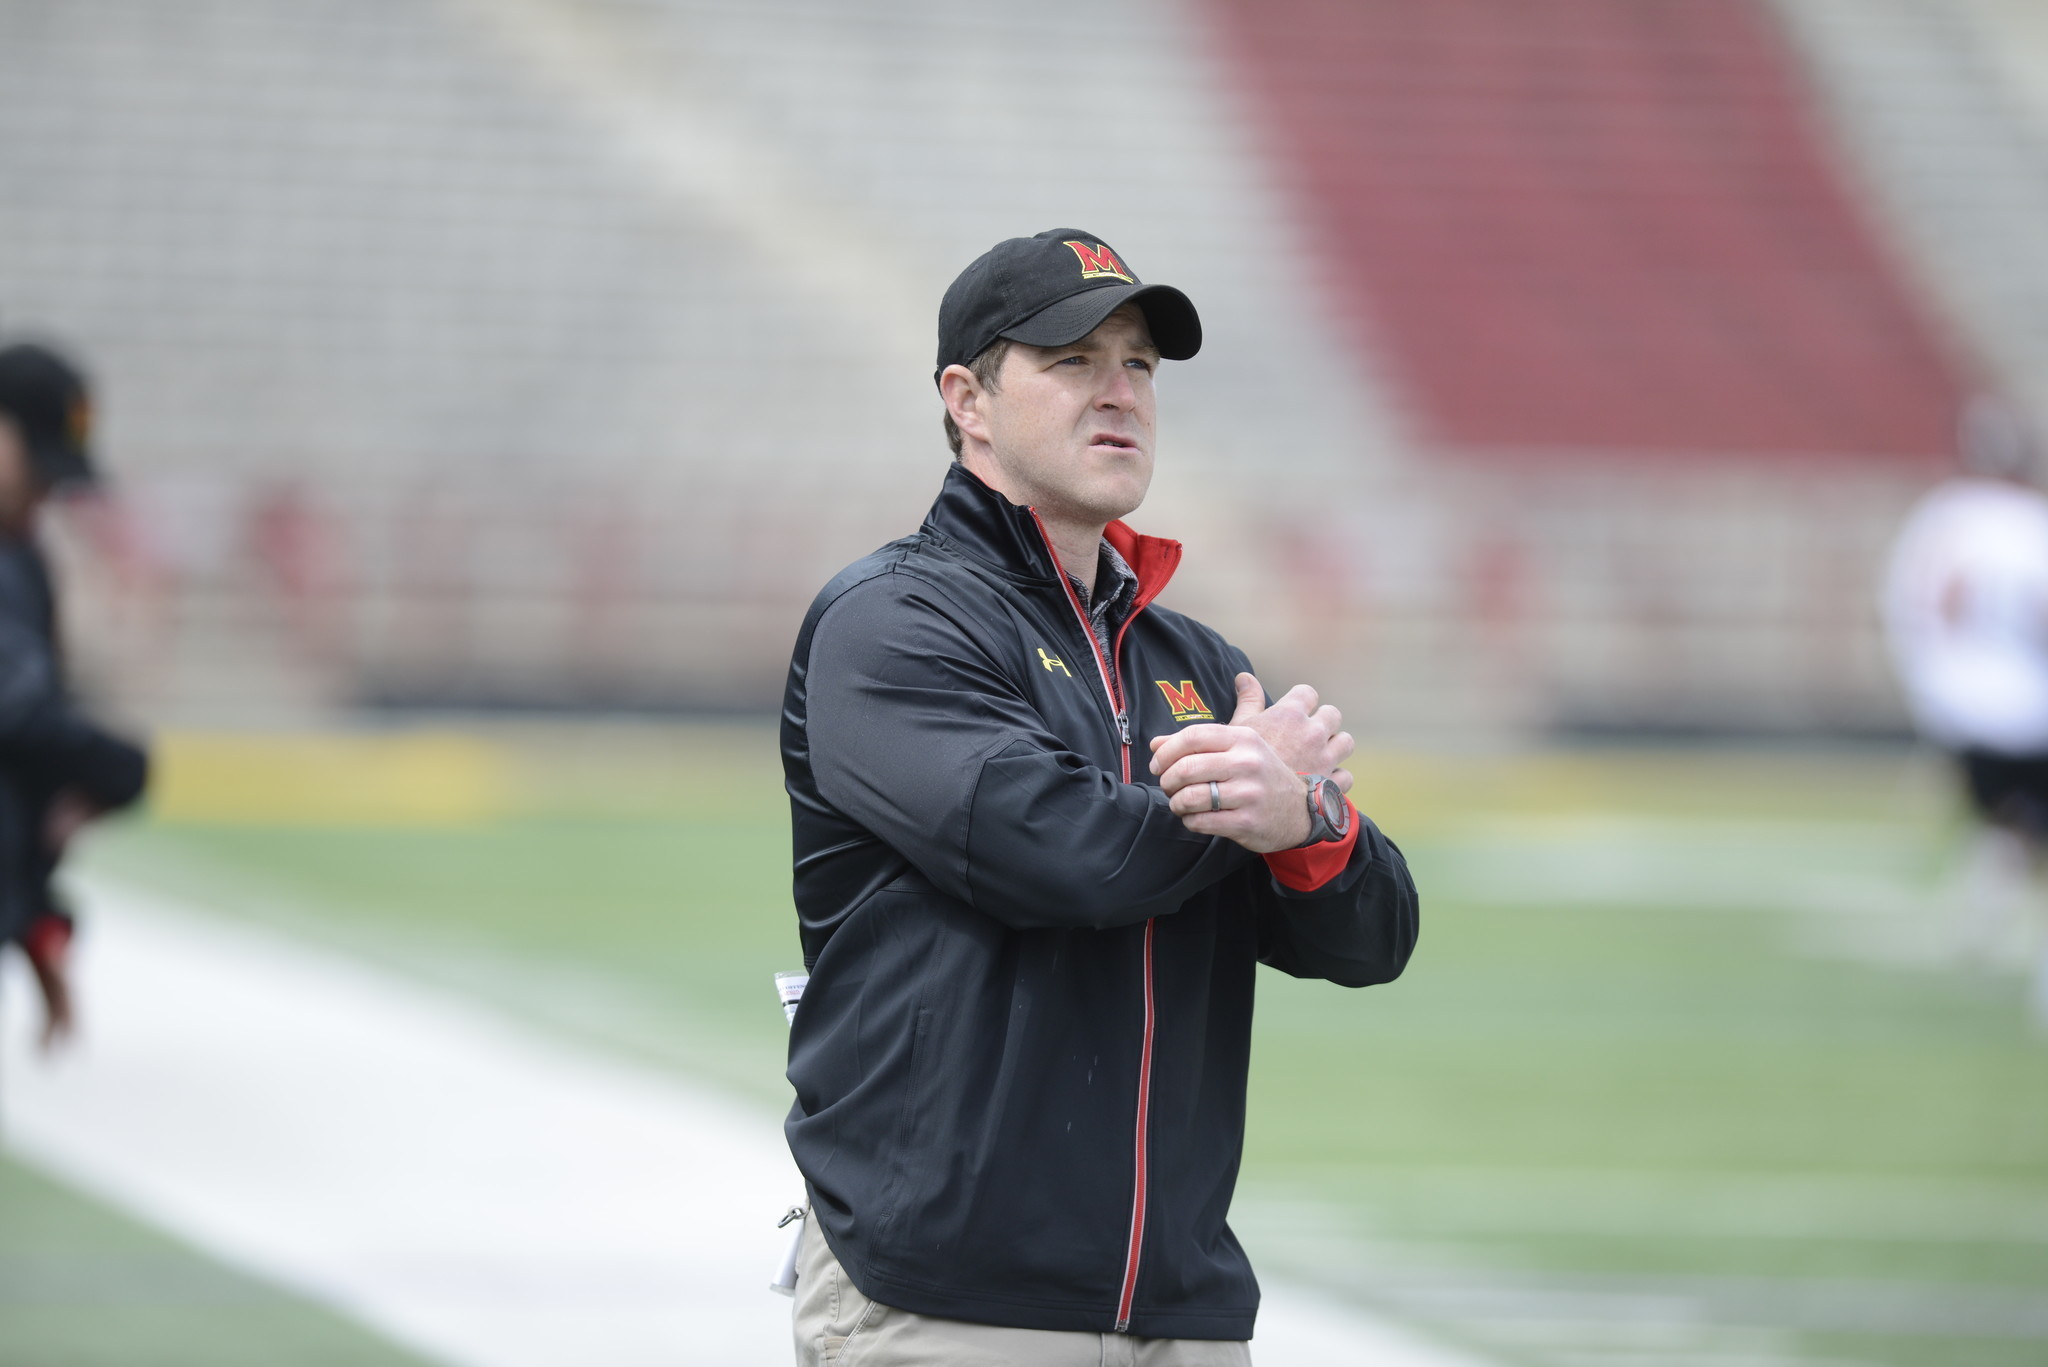 Report that Terps lacrosse assistant Kevin Conry will be Michigan’s new head coach is disputed